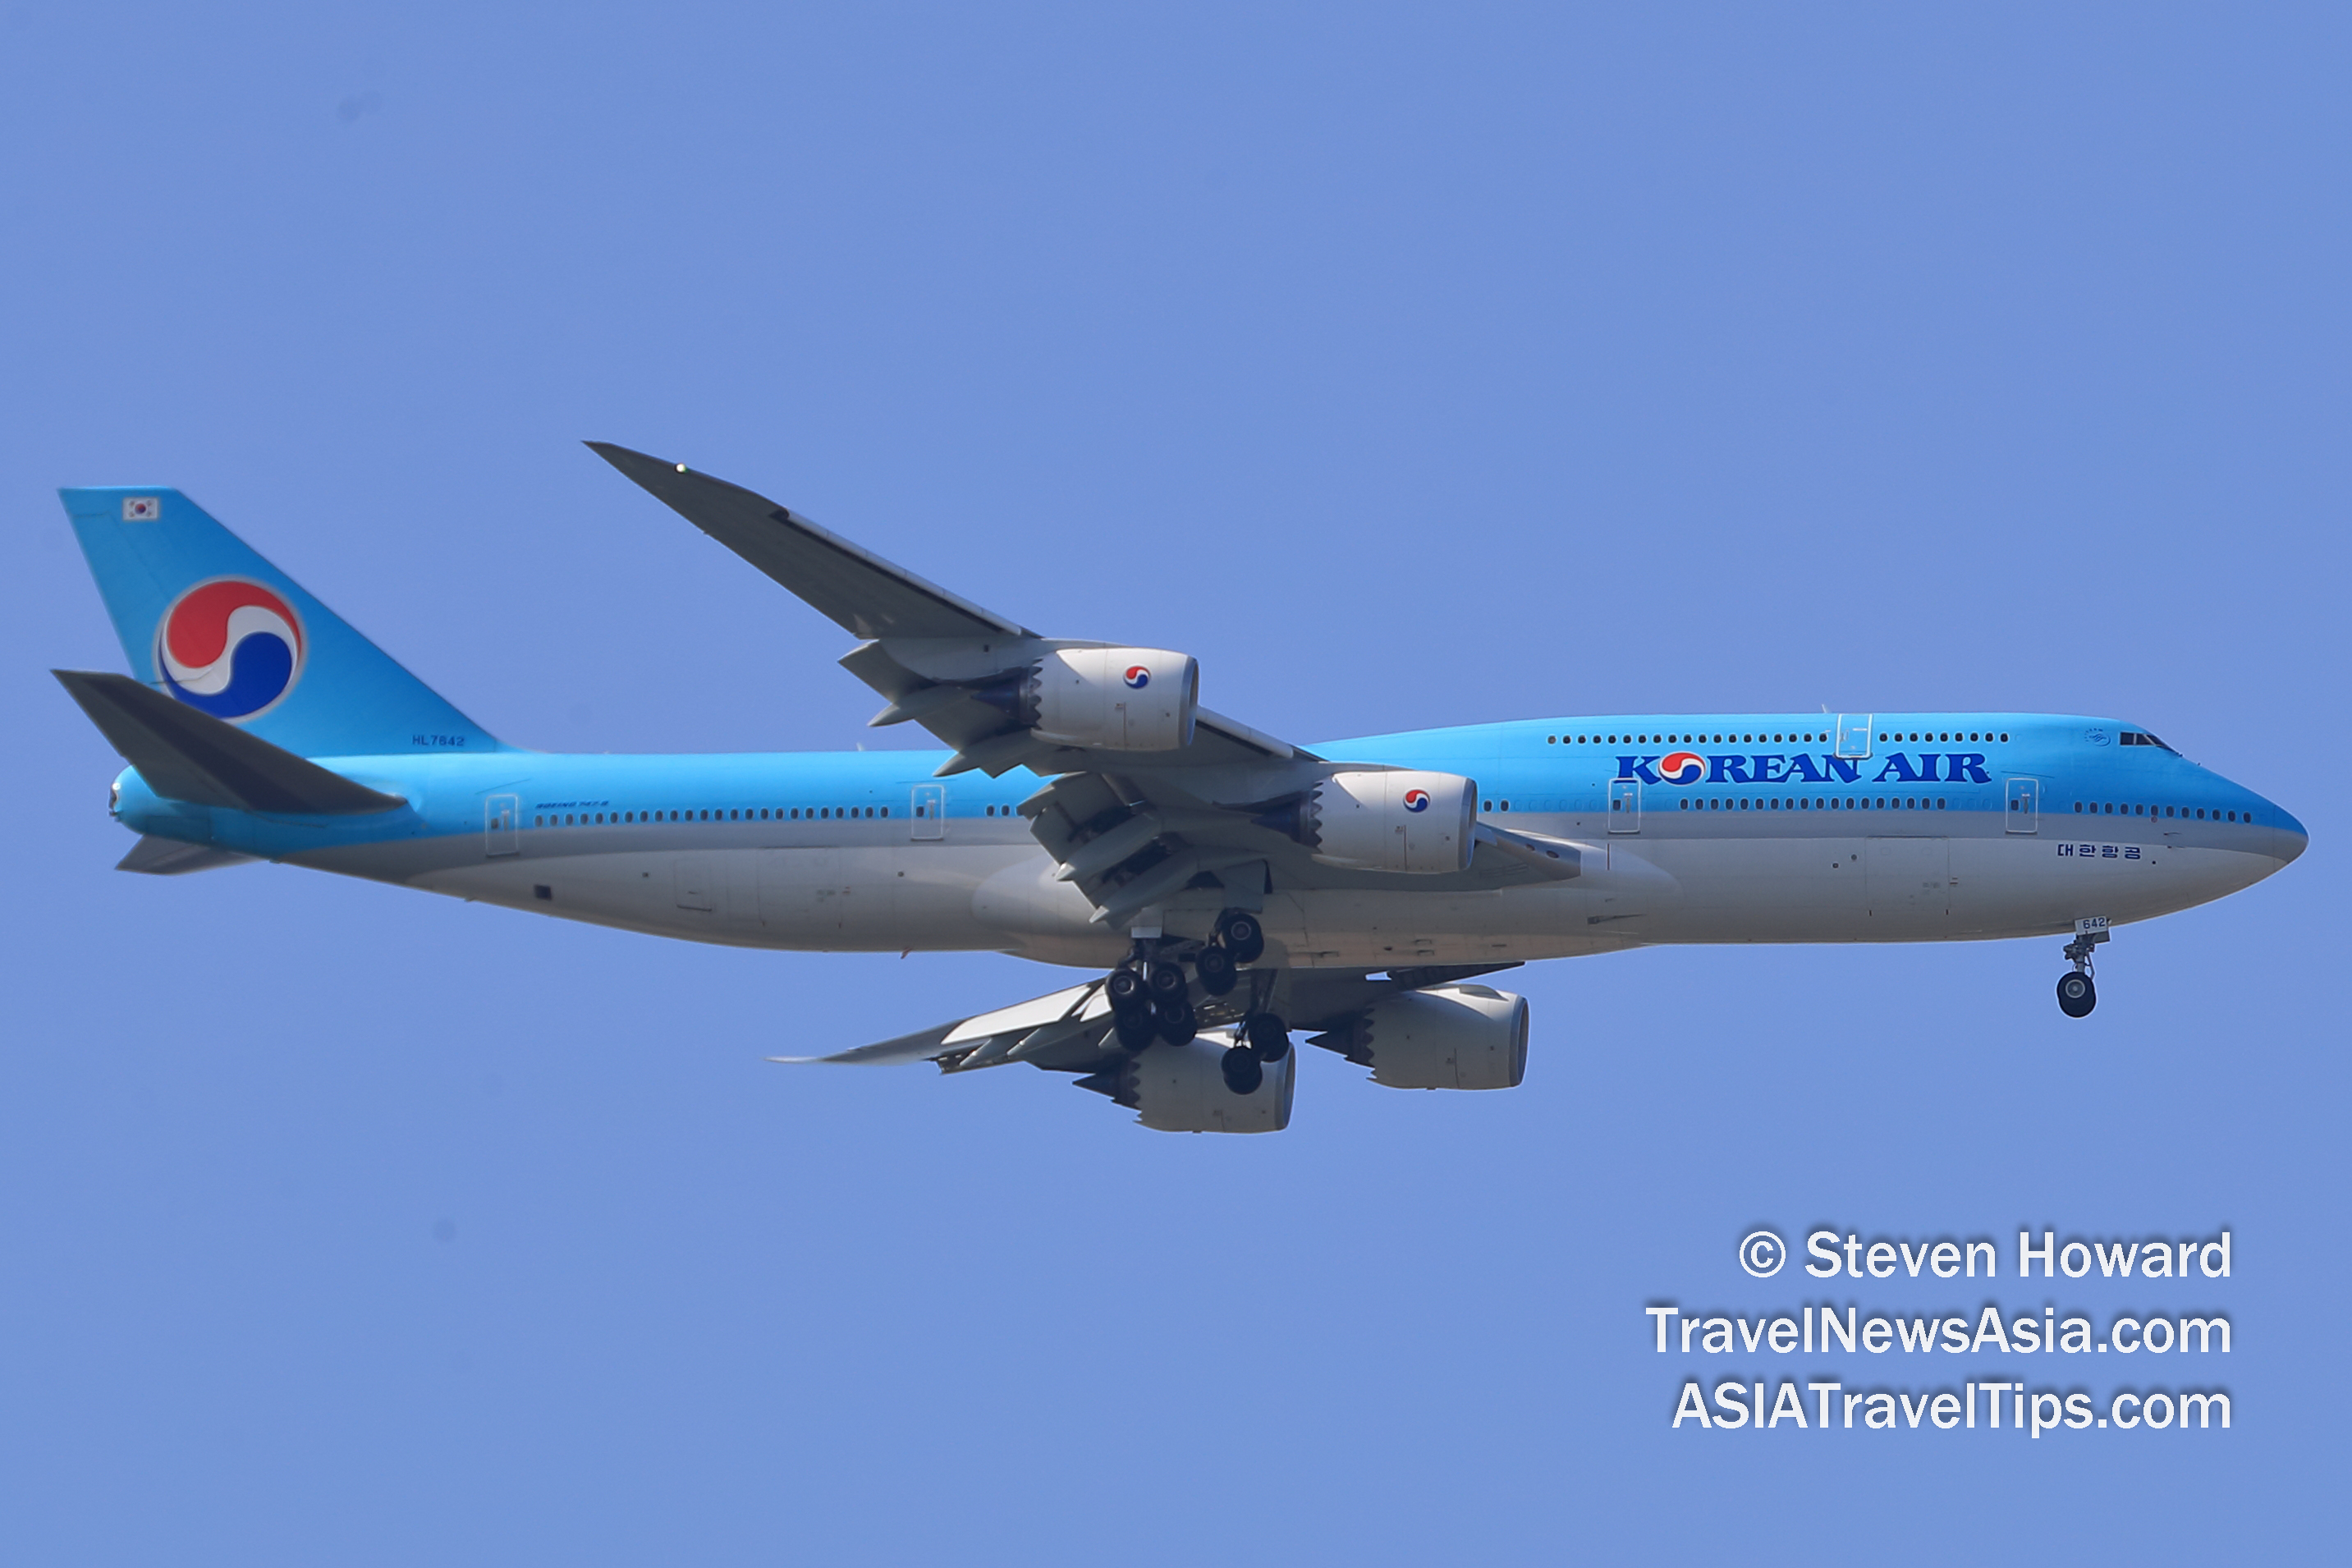 Korean Air Boeing 747-8 reg: HL7642. Picture by Steven Howard of TravelNewsAsia.com Click to enlarge.